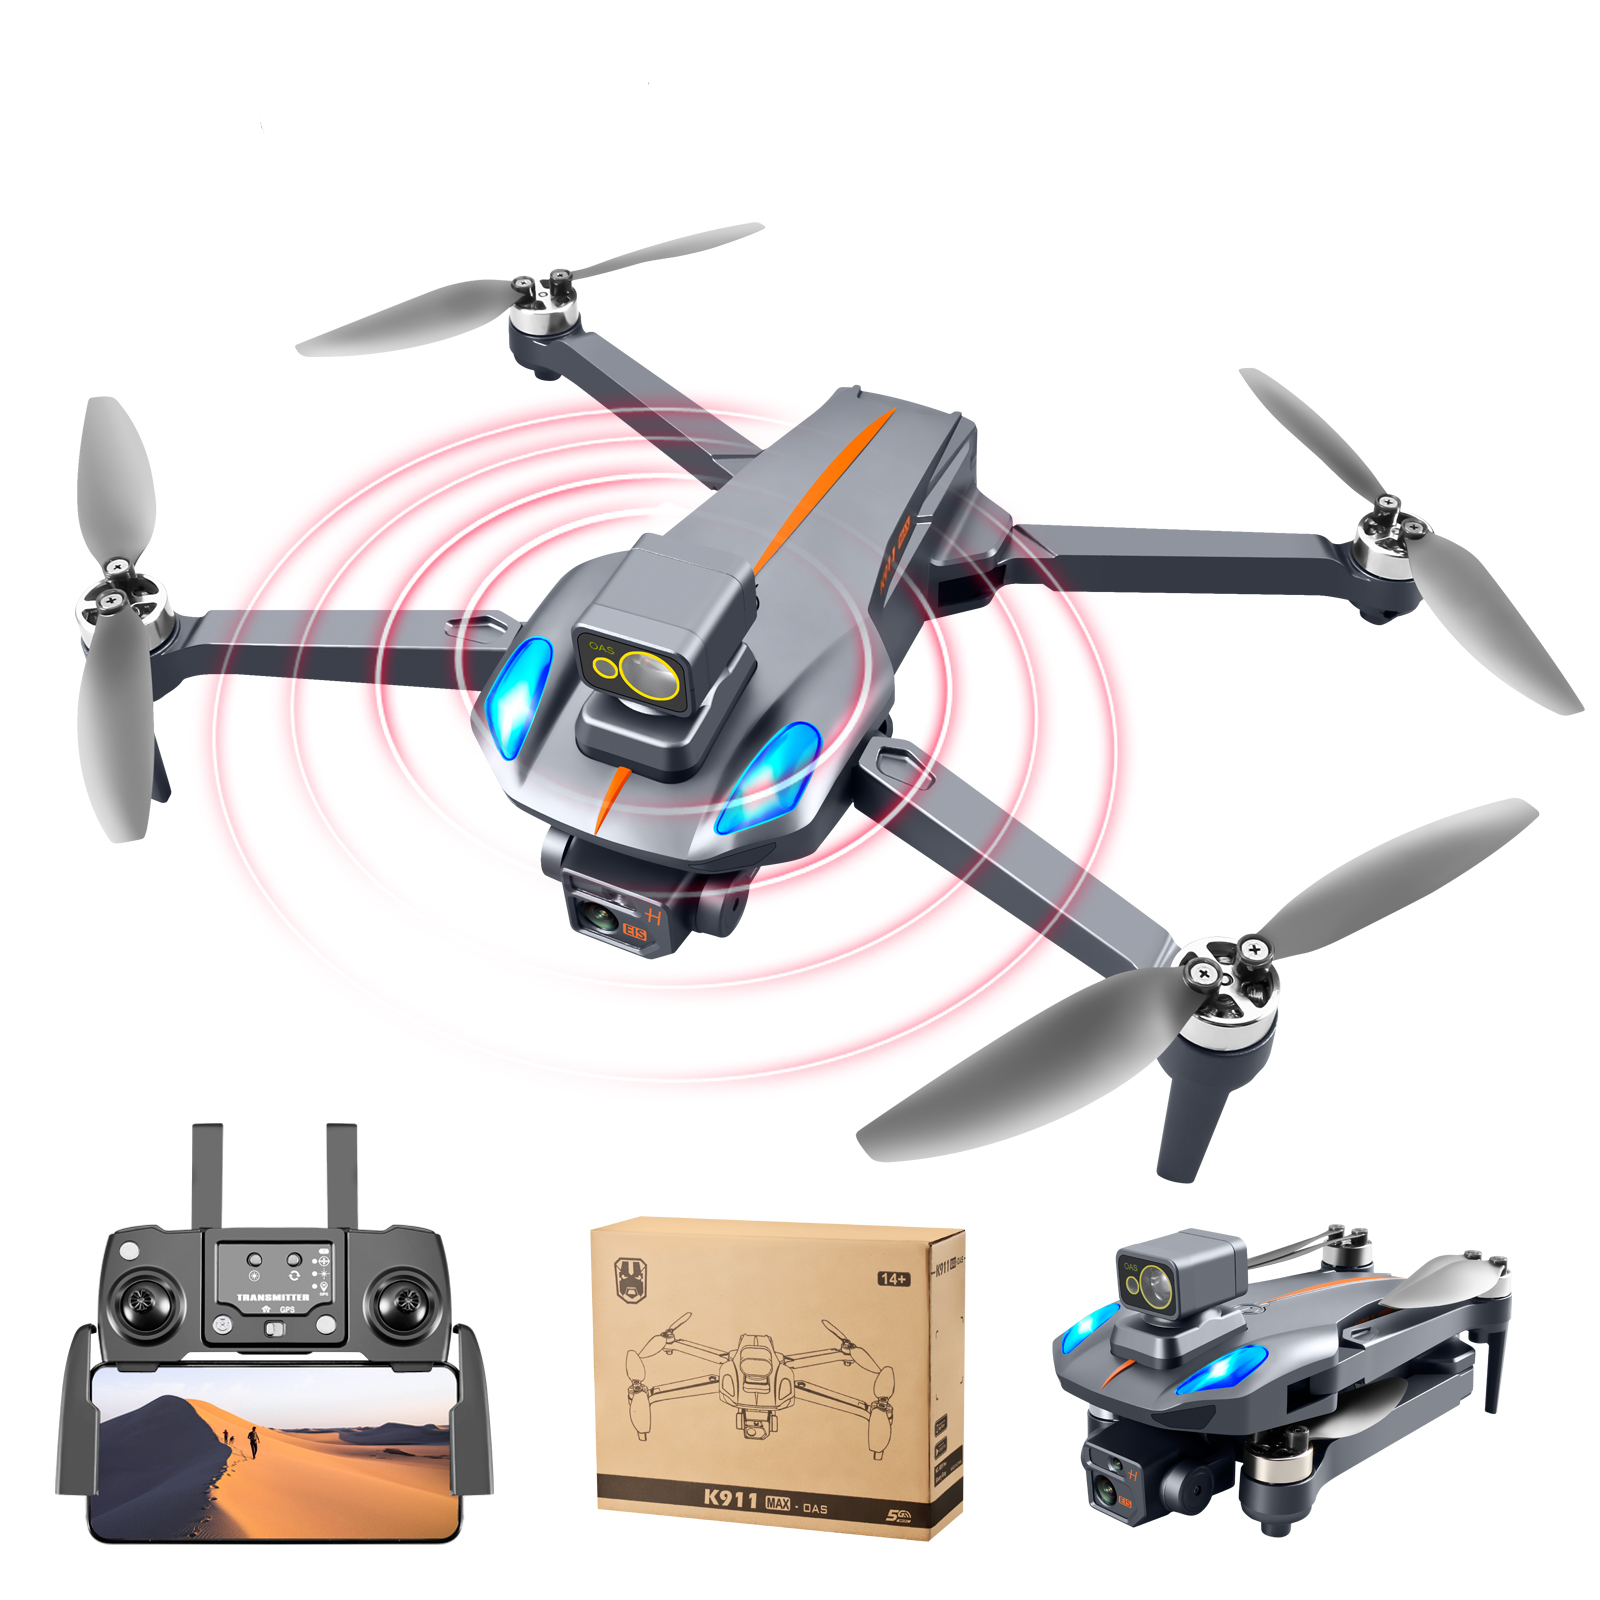 Find XKJ K911 Max 5G WIFI FPV GPS with 8K ESC Dual Camera 360 Obstacle Avoidance Optical Flow Positioning Brushless 225g Foldable RC Drone Quadcopter RTF for Sale on Gipsybee.com with cryptocurrencies